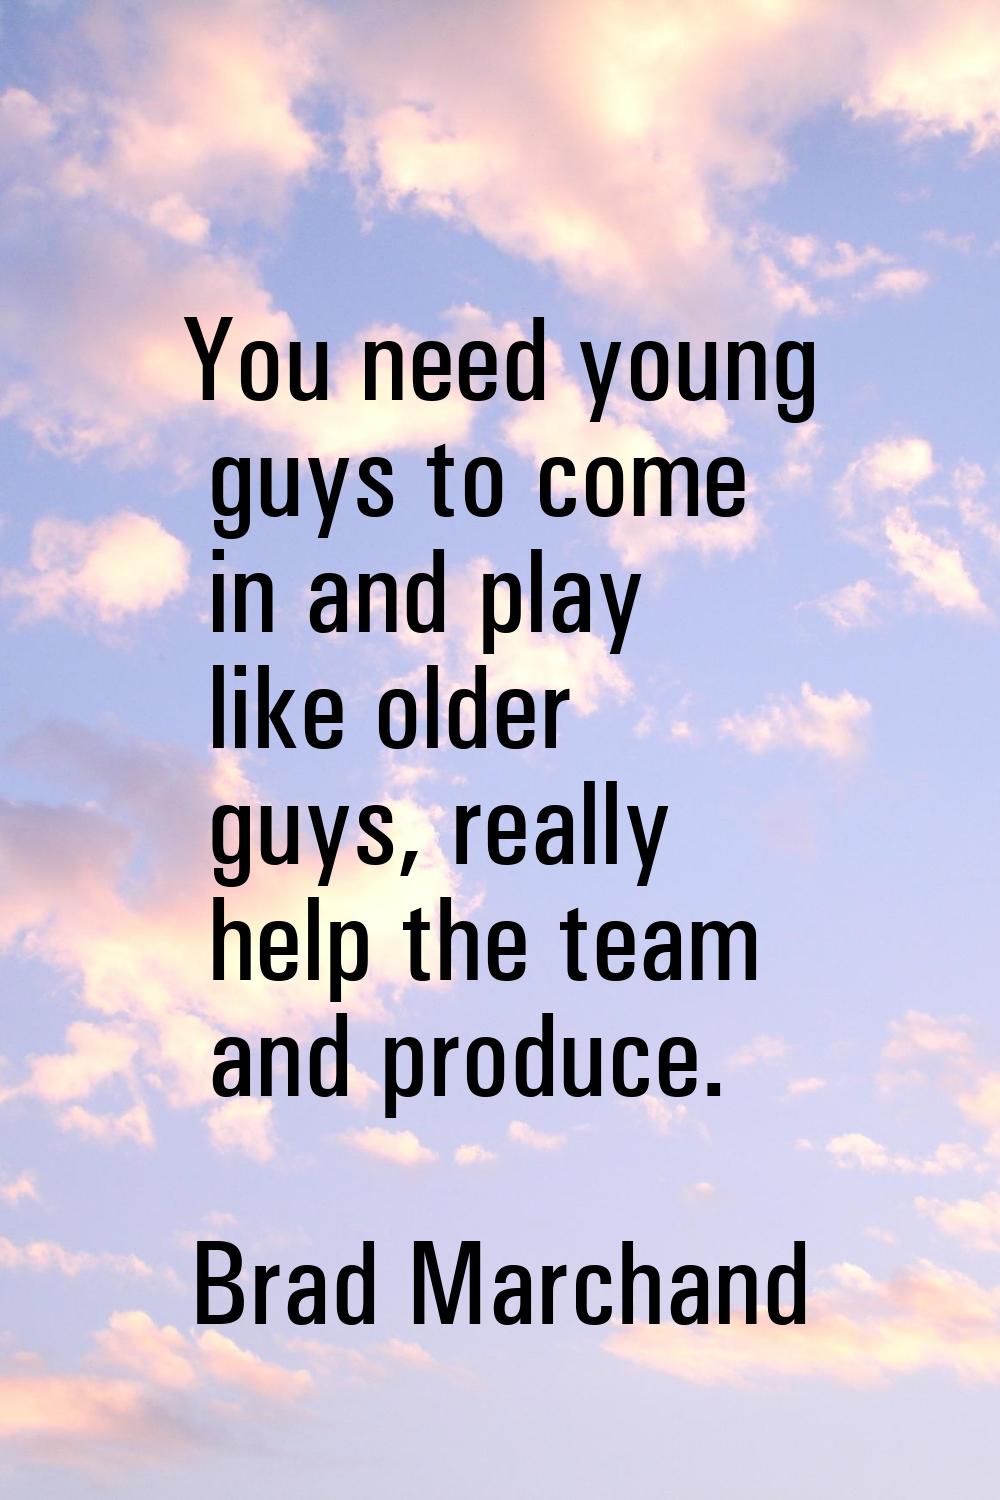 You need young guys to come in and play like older guys, really help the team and produce.